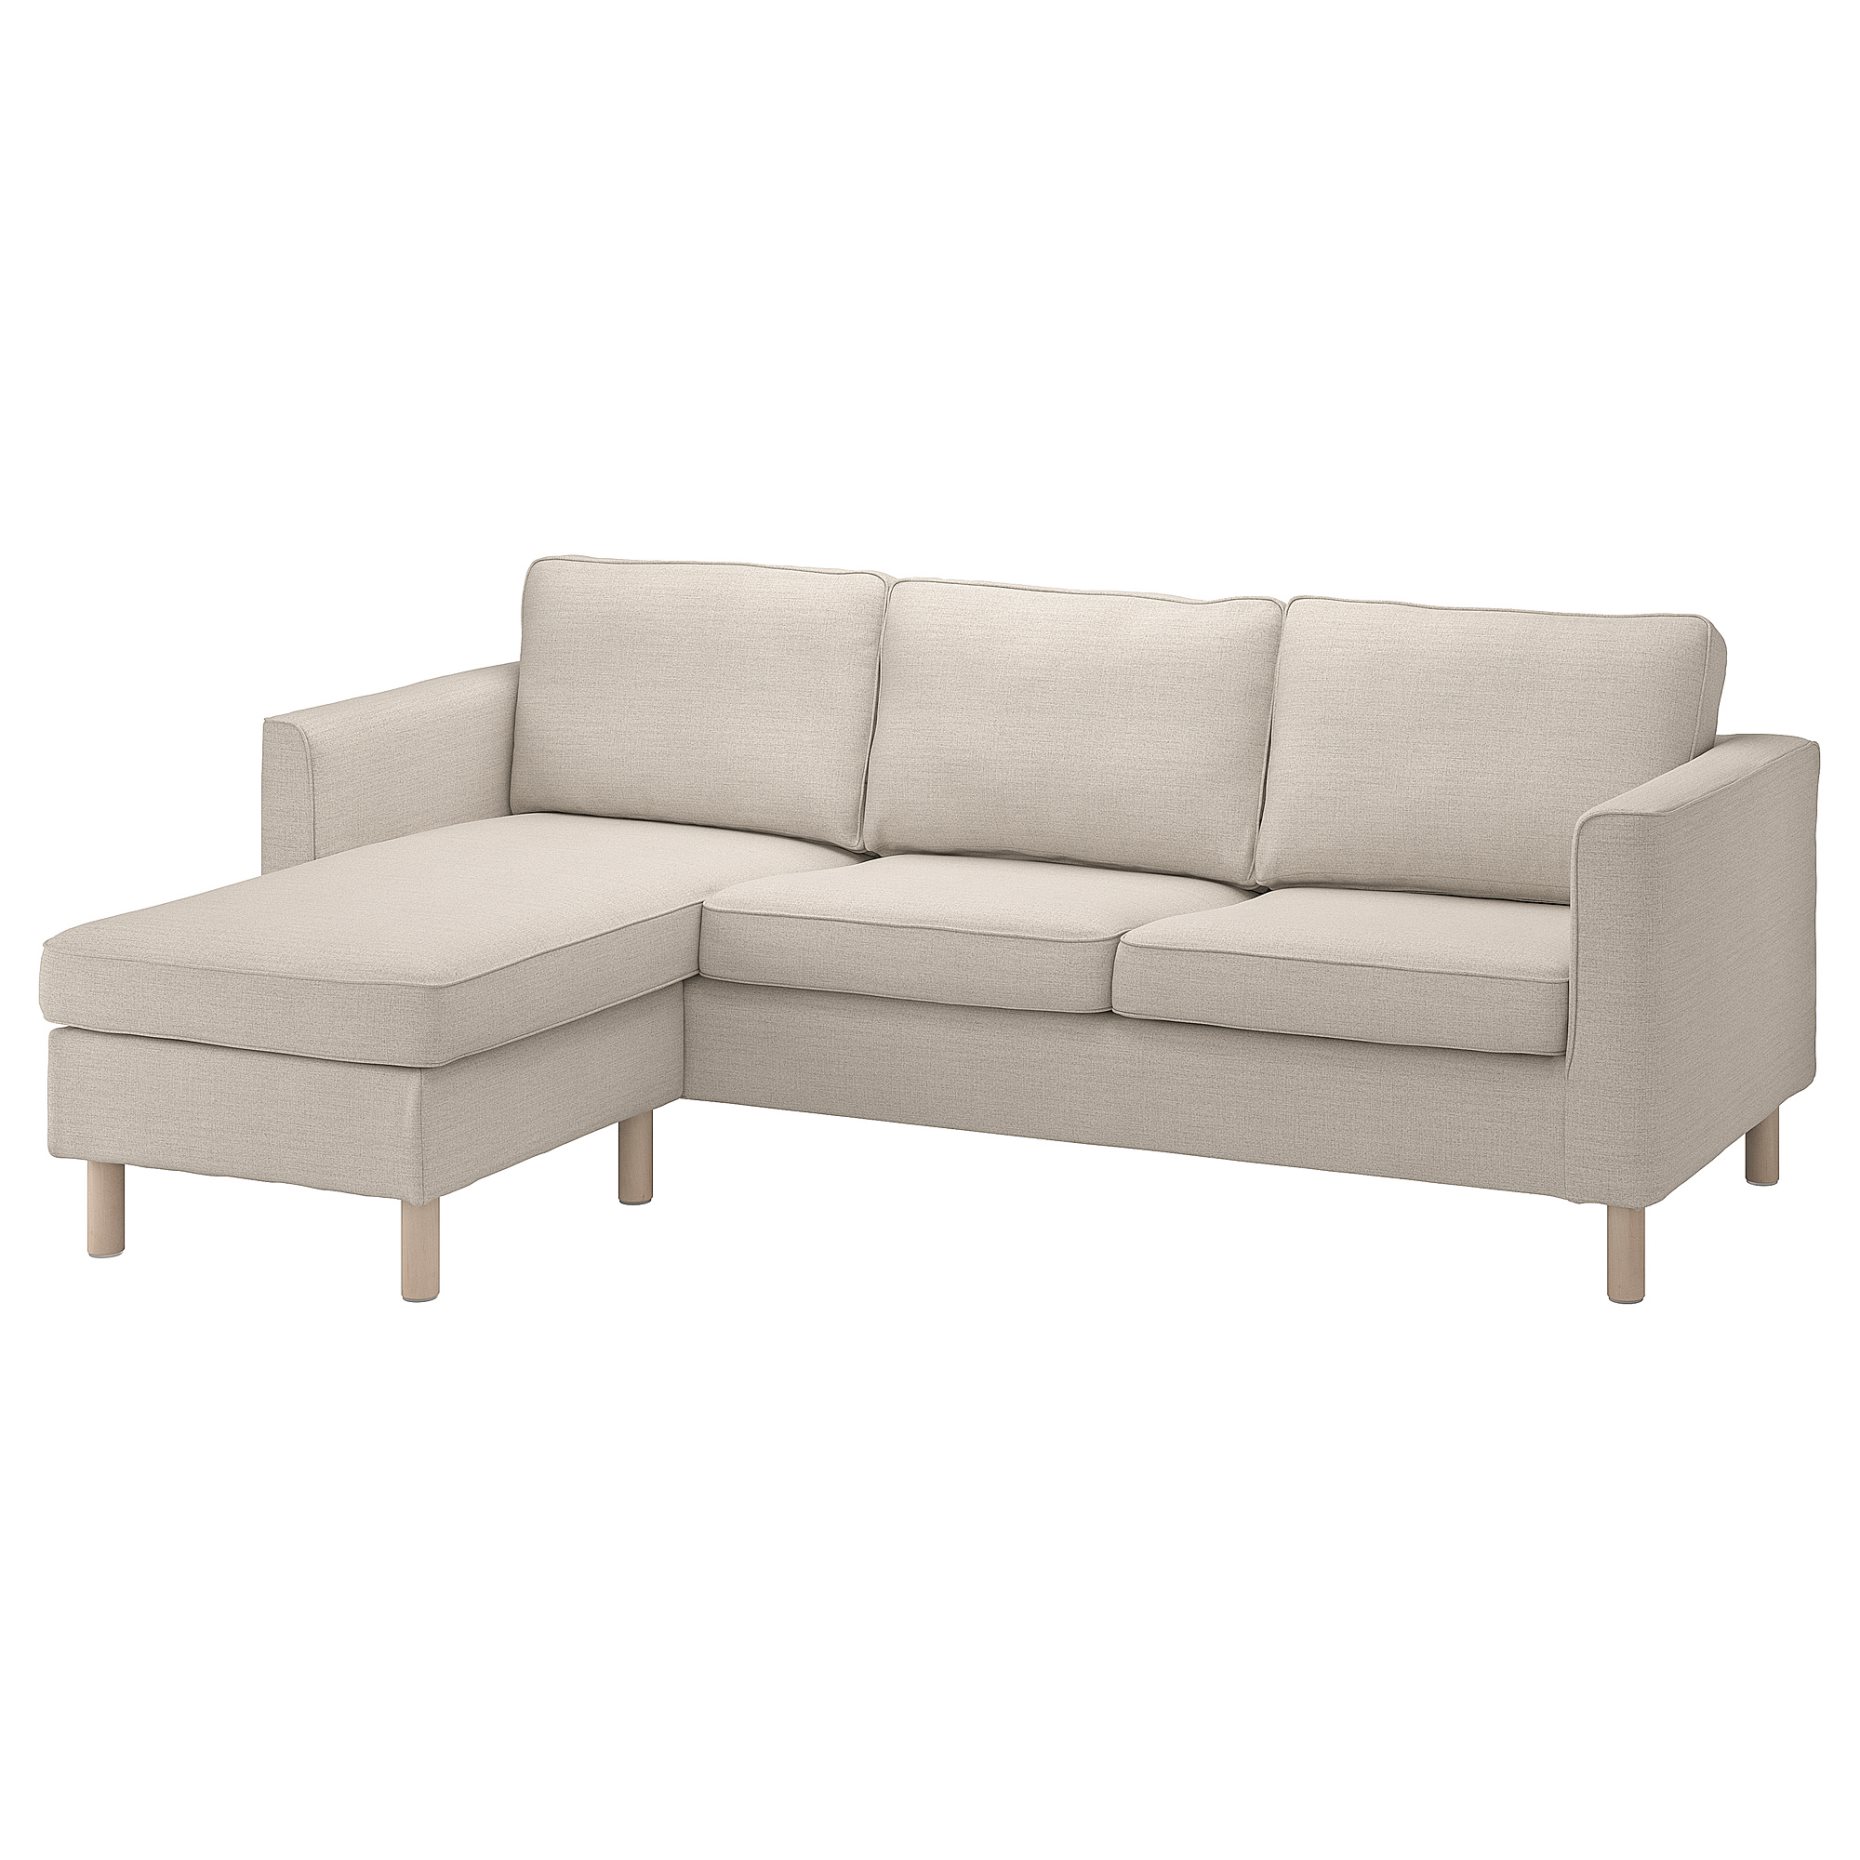 PÄRUP, cover for 3-seat sofa with chaise longue, 604.939.90